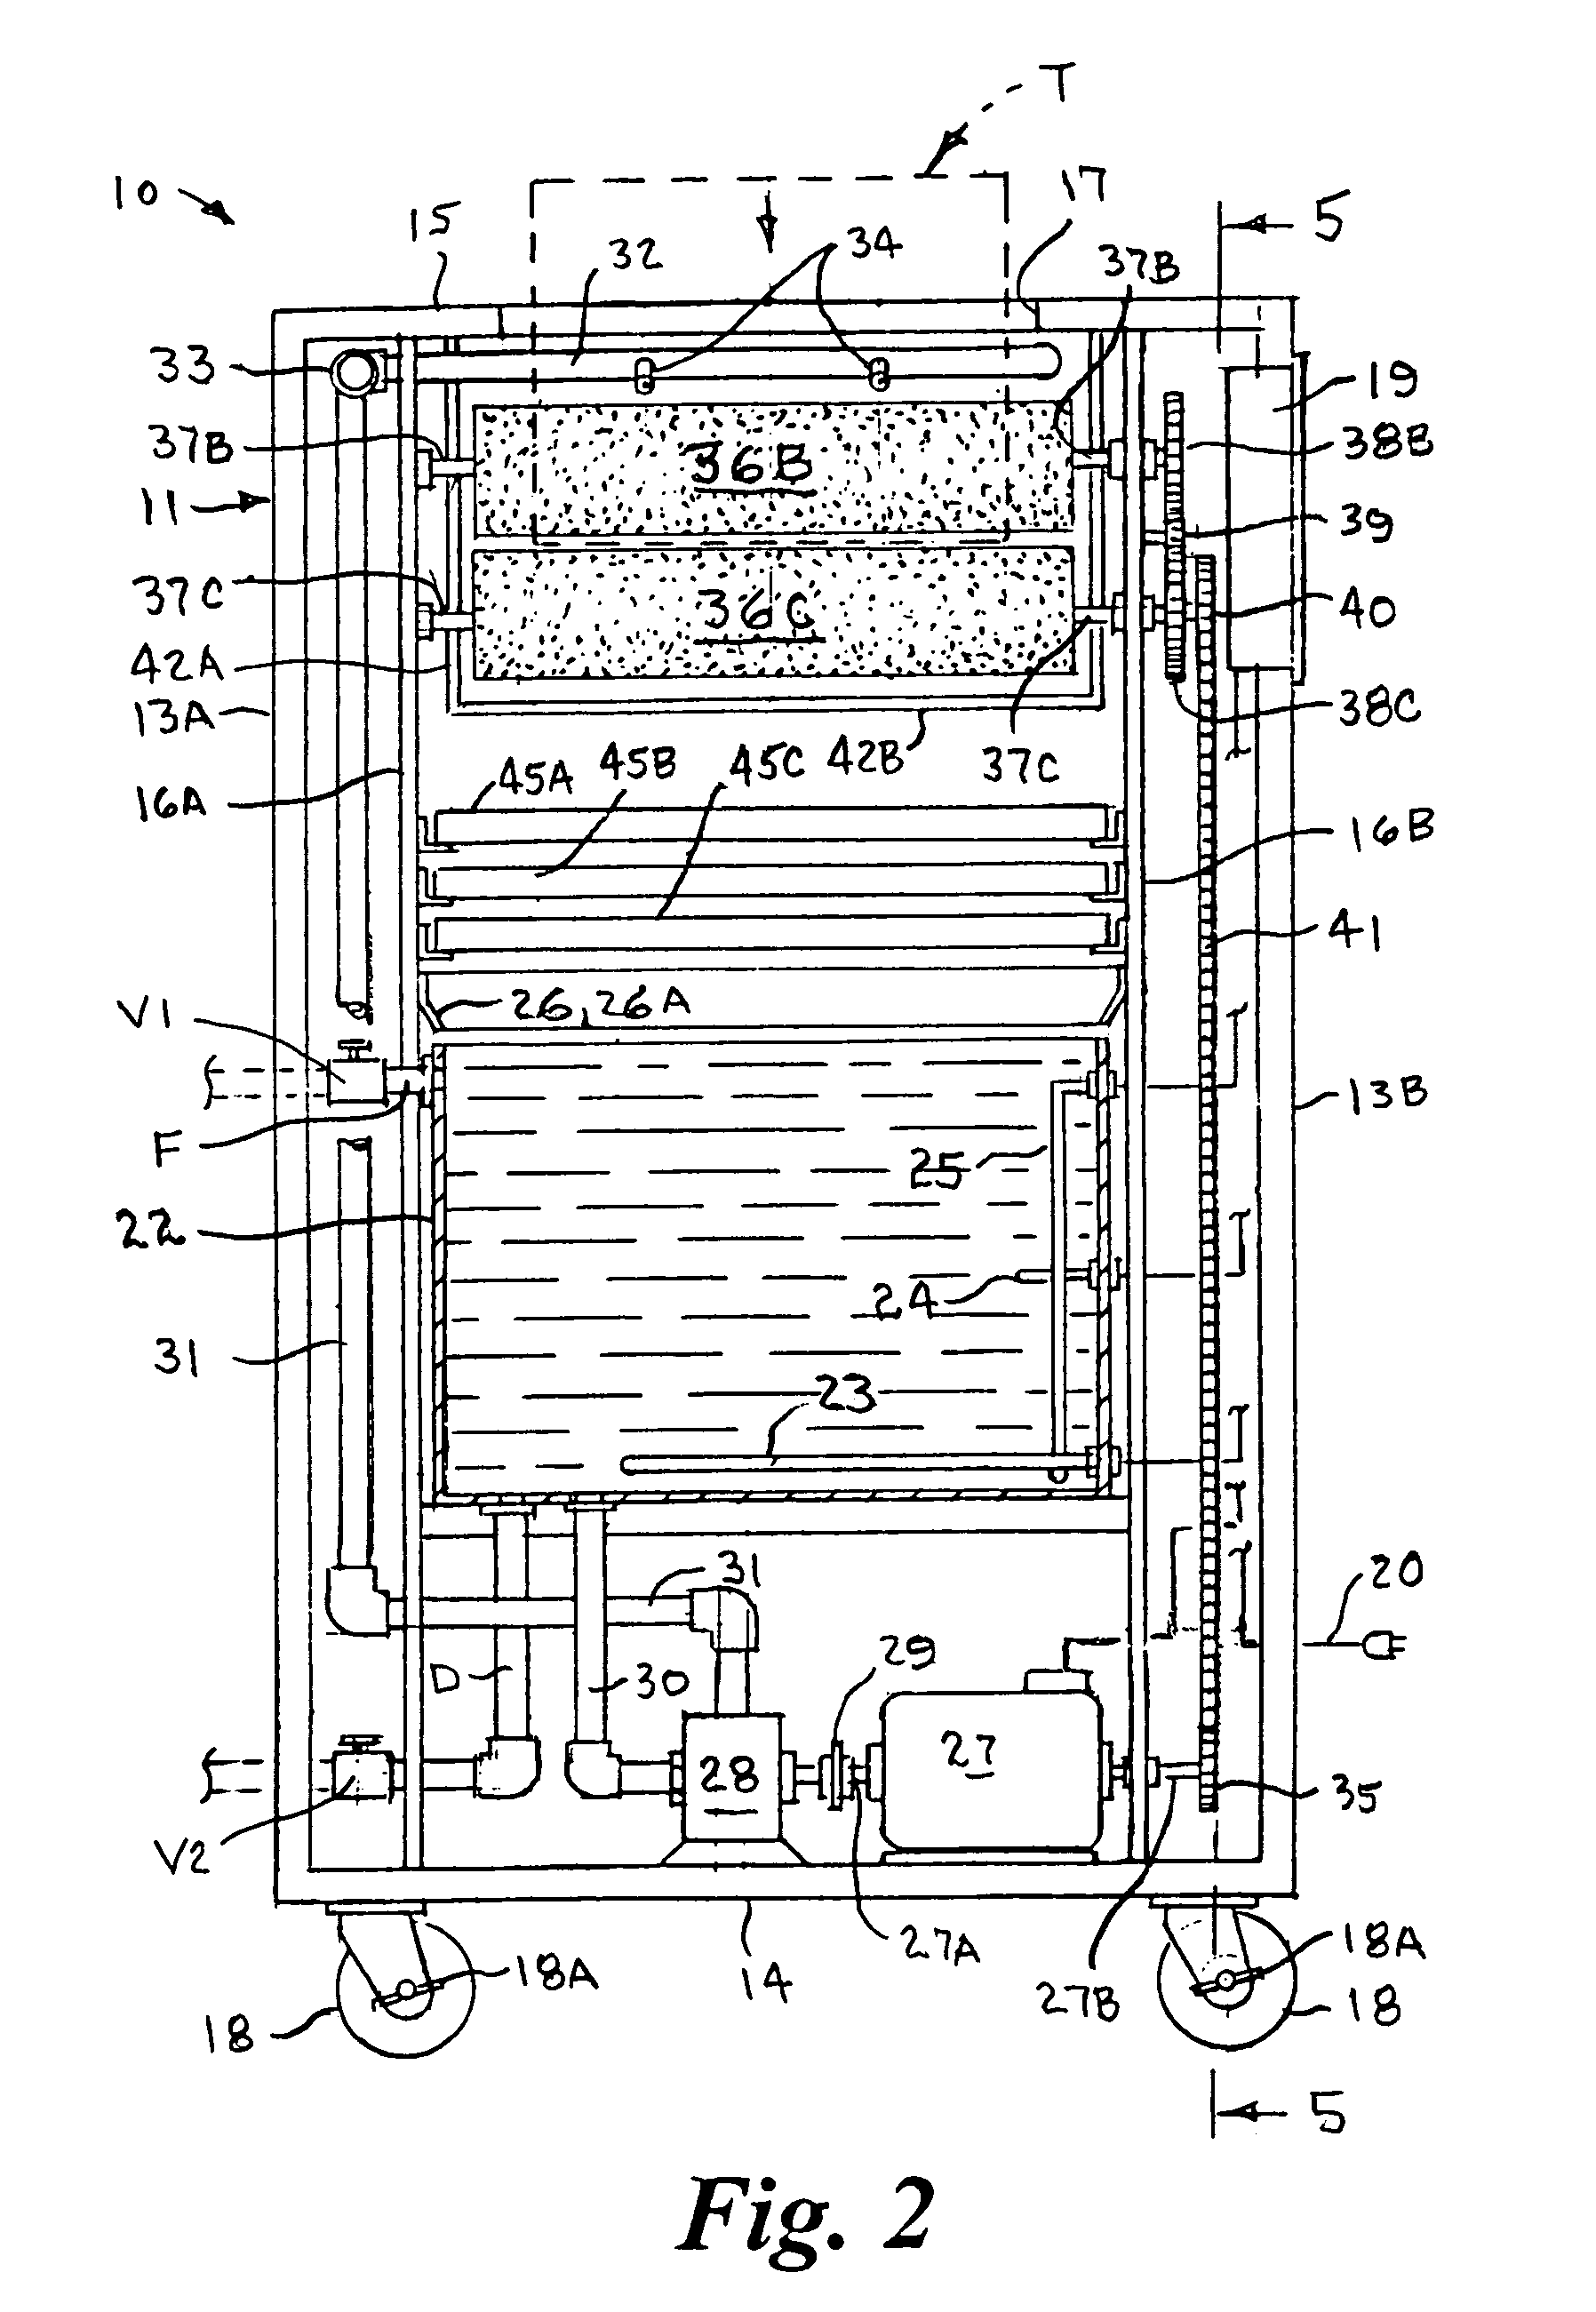 Portable food tray pre-wash and water recycling apparatus